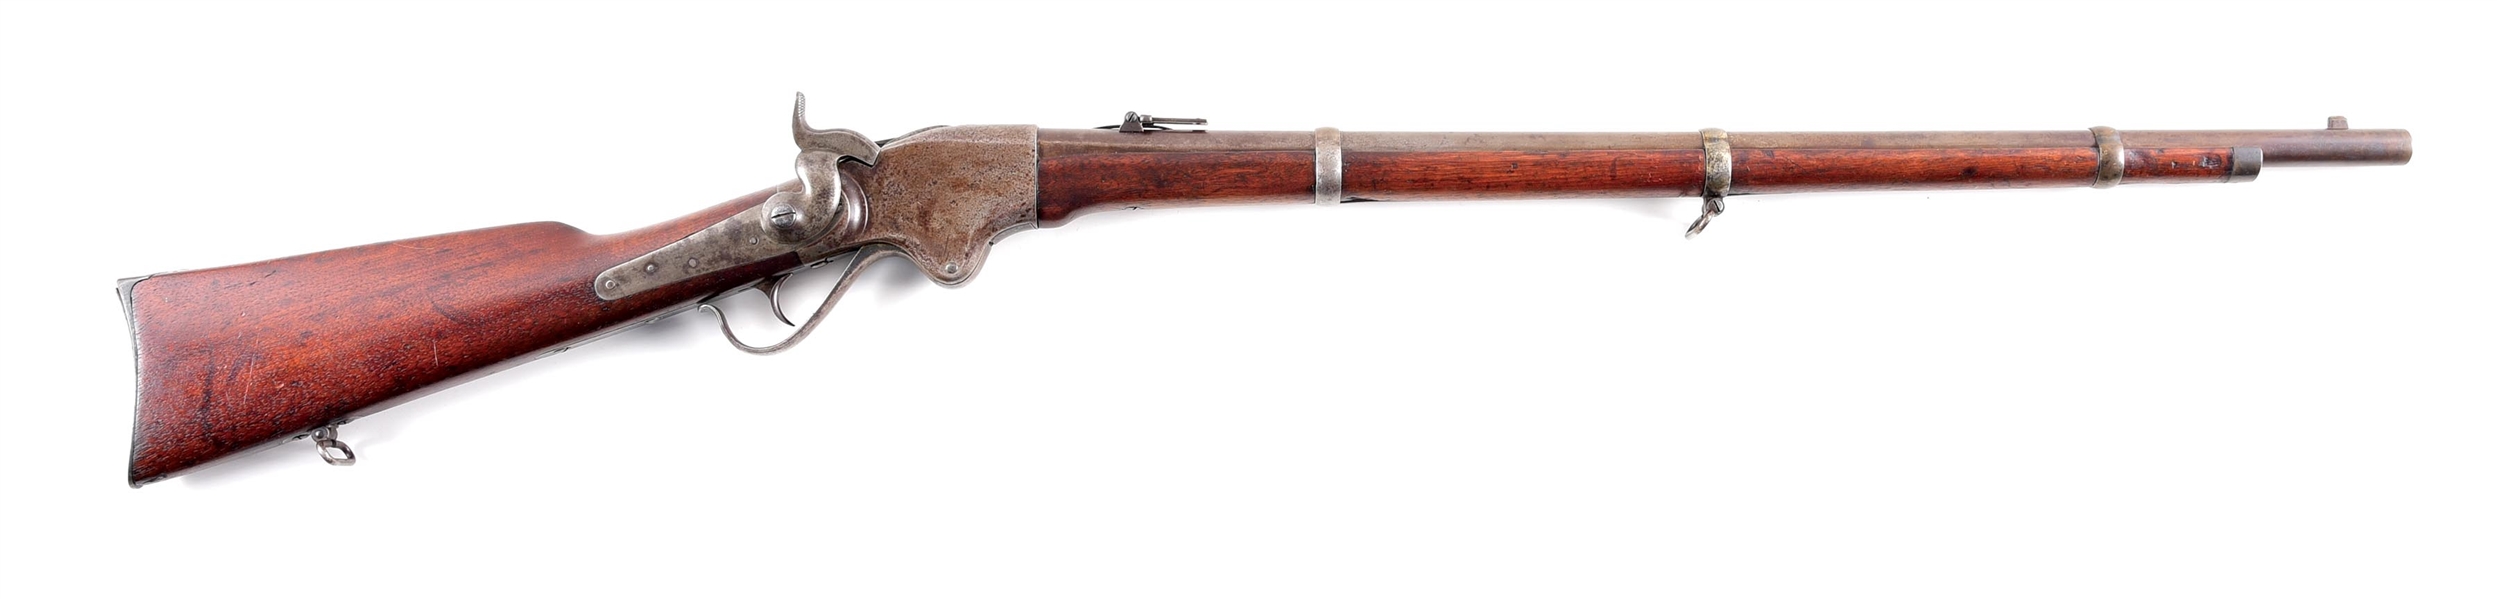 (A) SPENCER MODEL 1860 ARMY REPEATING RIFLE.